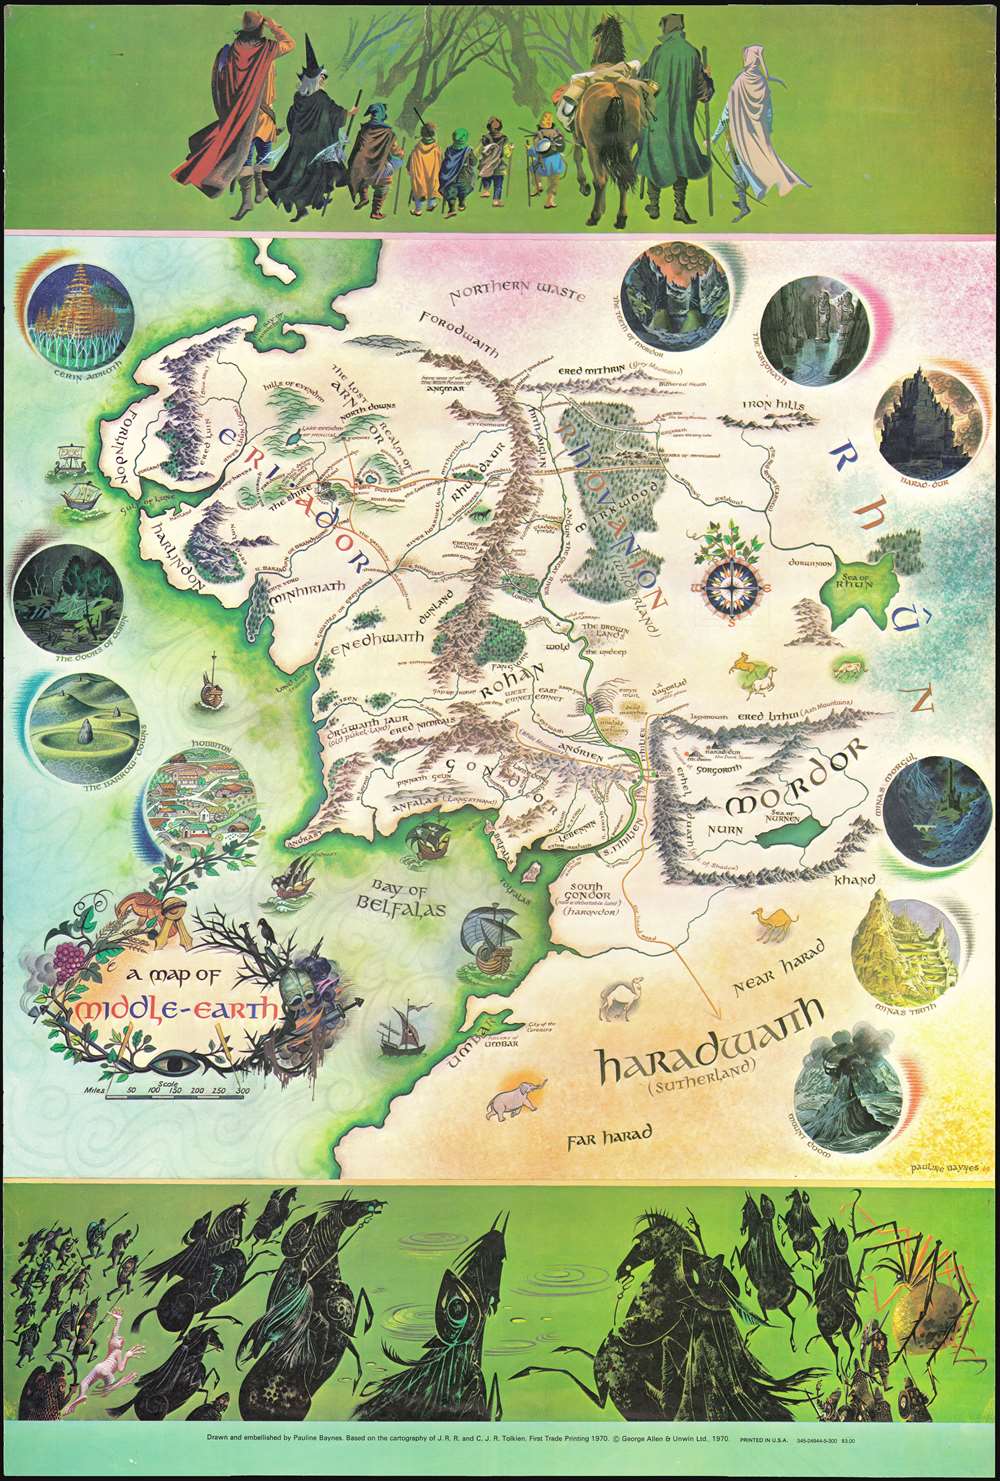 A Map of Middle-Earth. - Main View